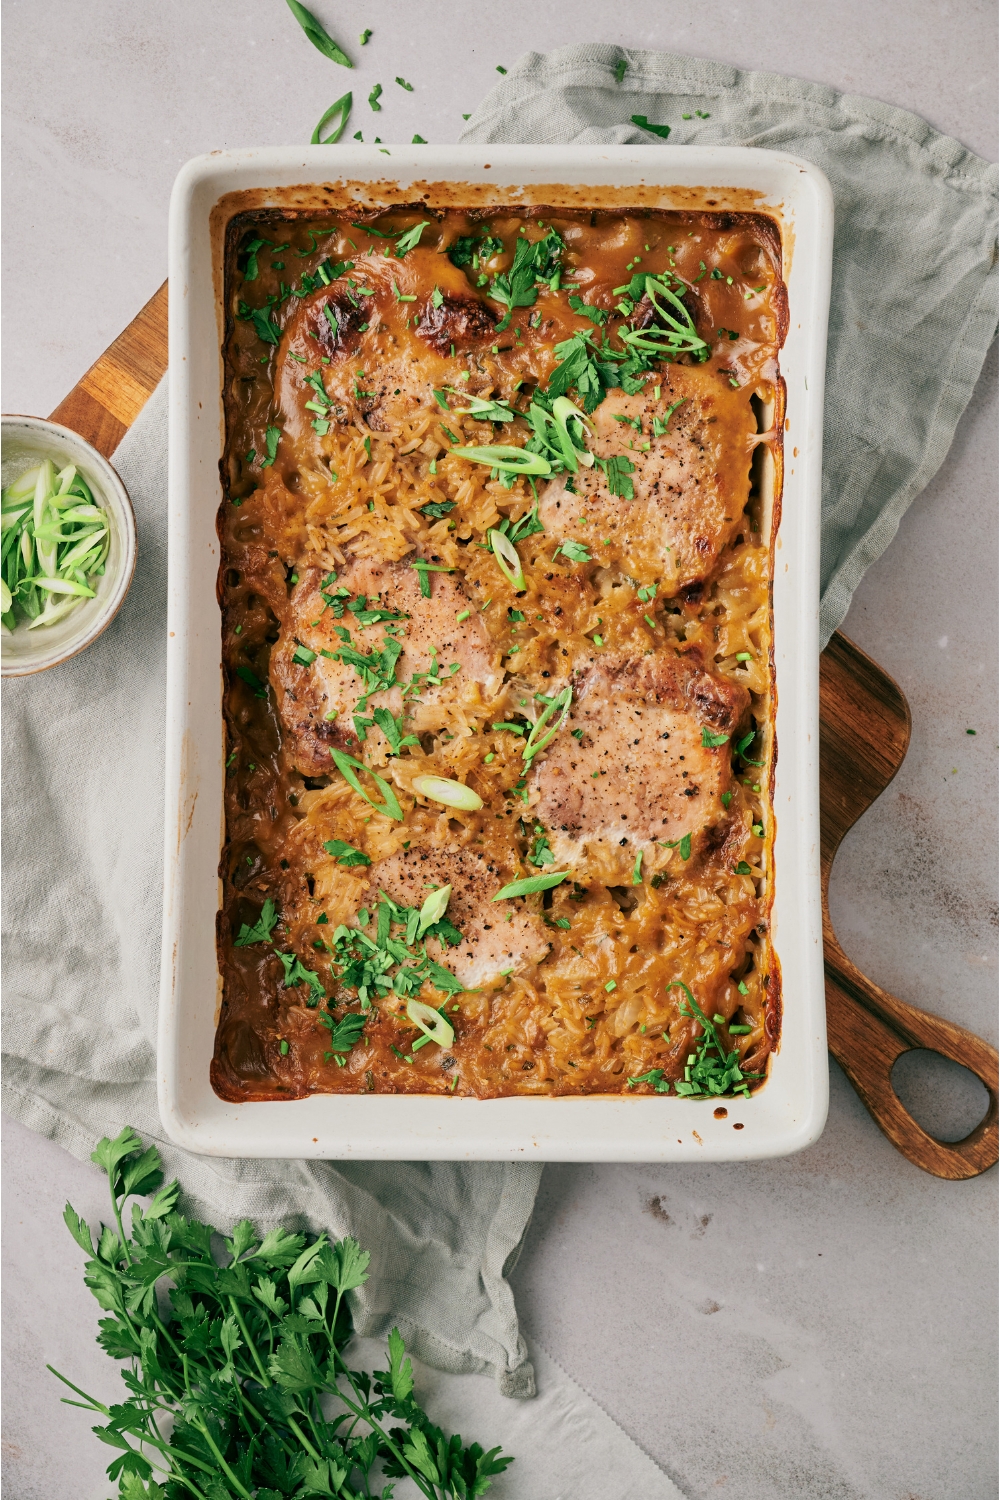 A baking dish filled with freshly baked pork chops and rice in a seasoned cream sauce with green onions on top.